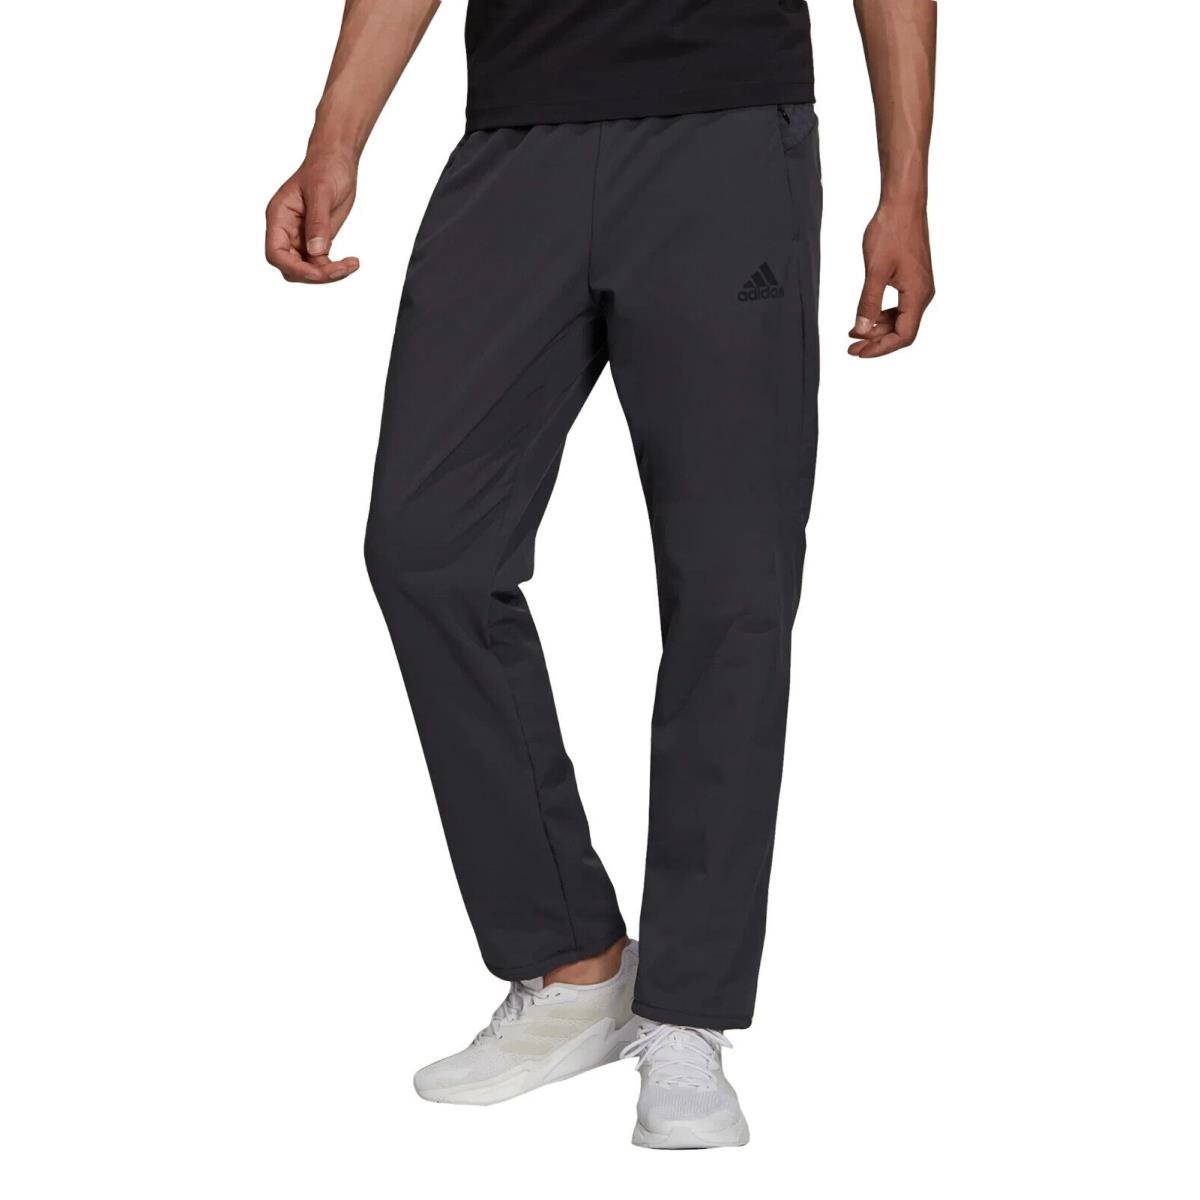 Adidas L82801 Mens Grey Cold. Rdy Sweatpants Size S